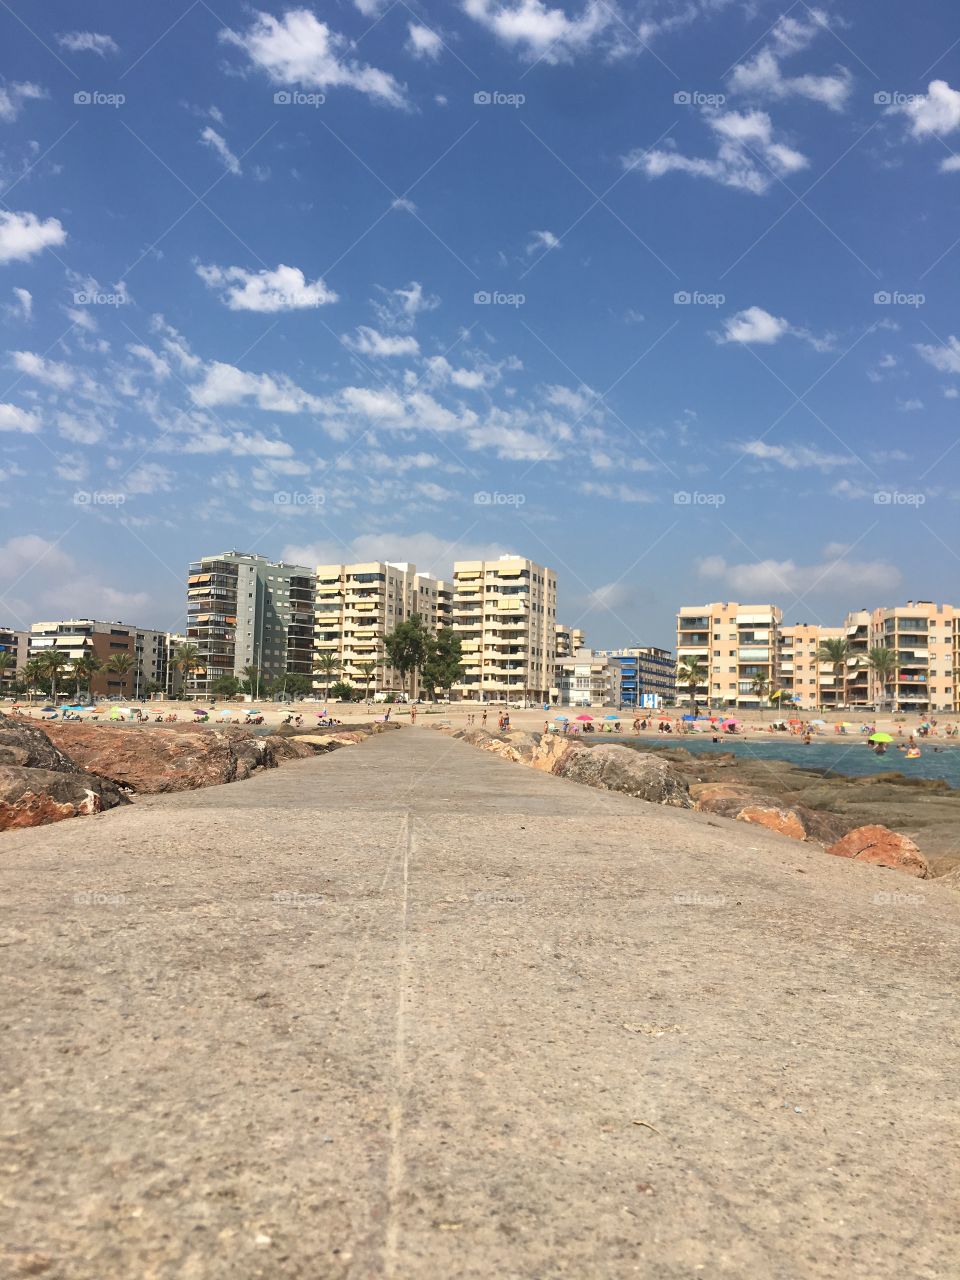  Castellón beach where nature and the city are Face to face. This walk cement walkway stretched to meet the coarse sand and board walk.  